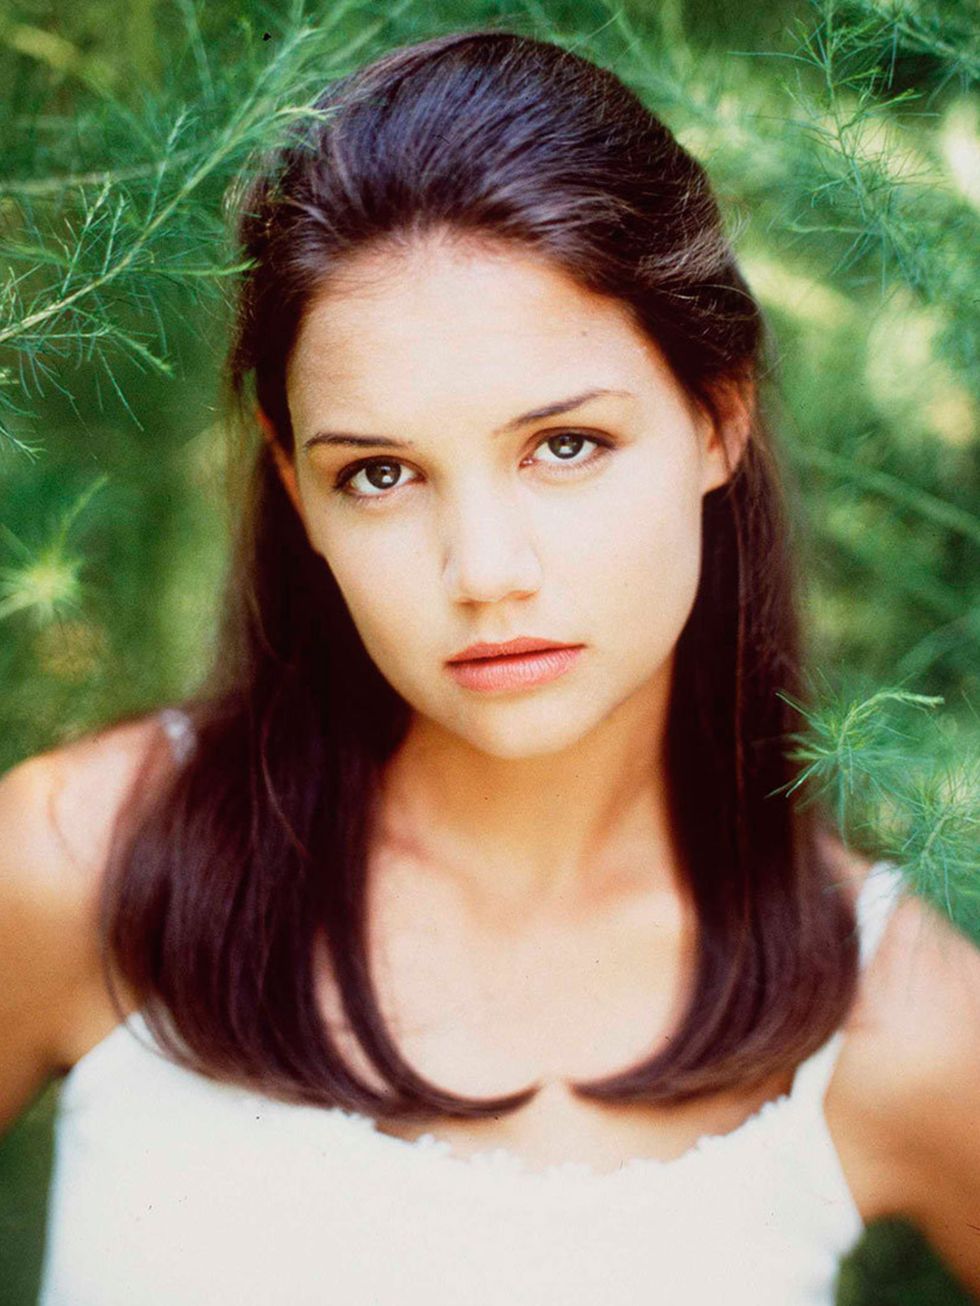 <p><strong>Joey Potter</strong></p><p>A fresh-faced <a href="http://www.elleuk.com/elle-tv/cover-stars/elle-magazine/katie-holmes-behind-the-scenes-cover-star-elle-april-issue-2014">Katie Holmes</a> played our original tomboy and girl next door. We were c